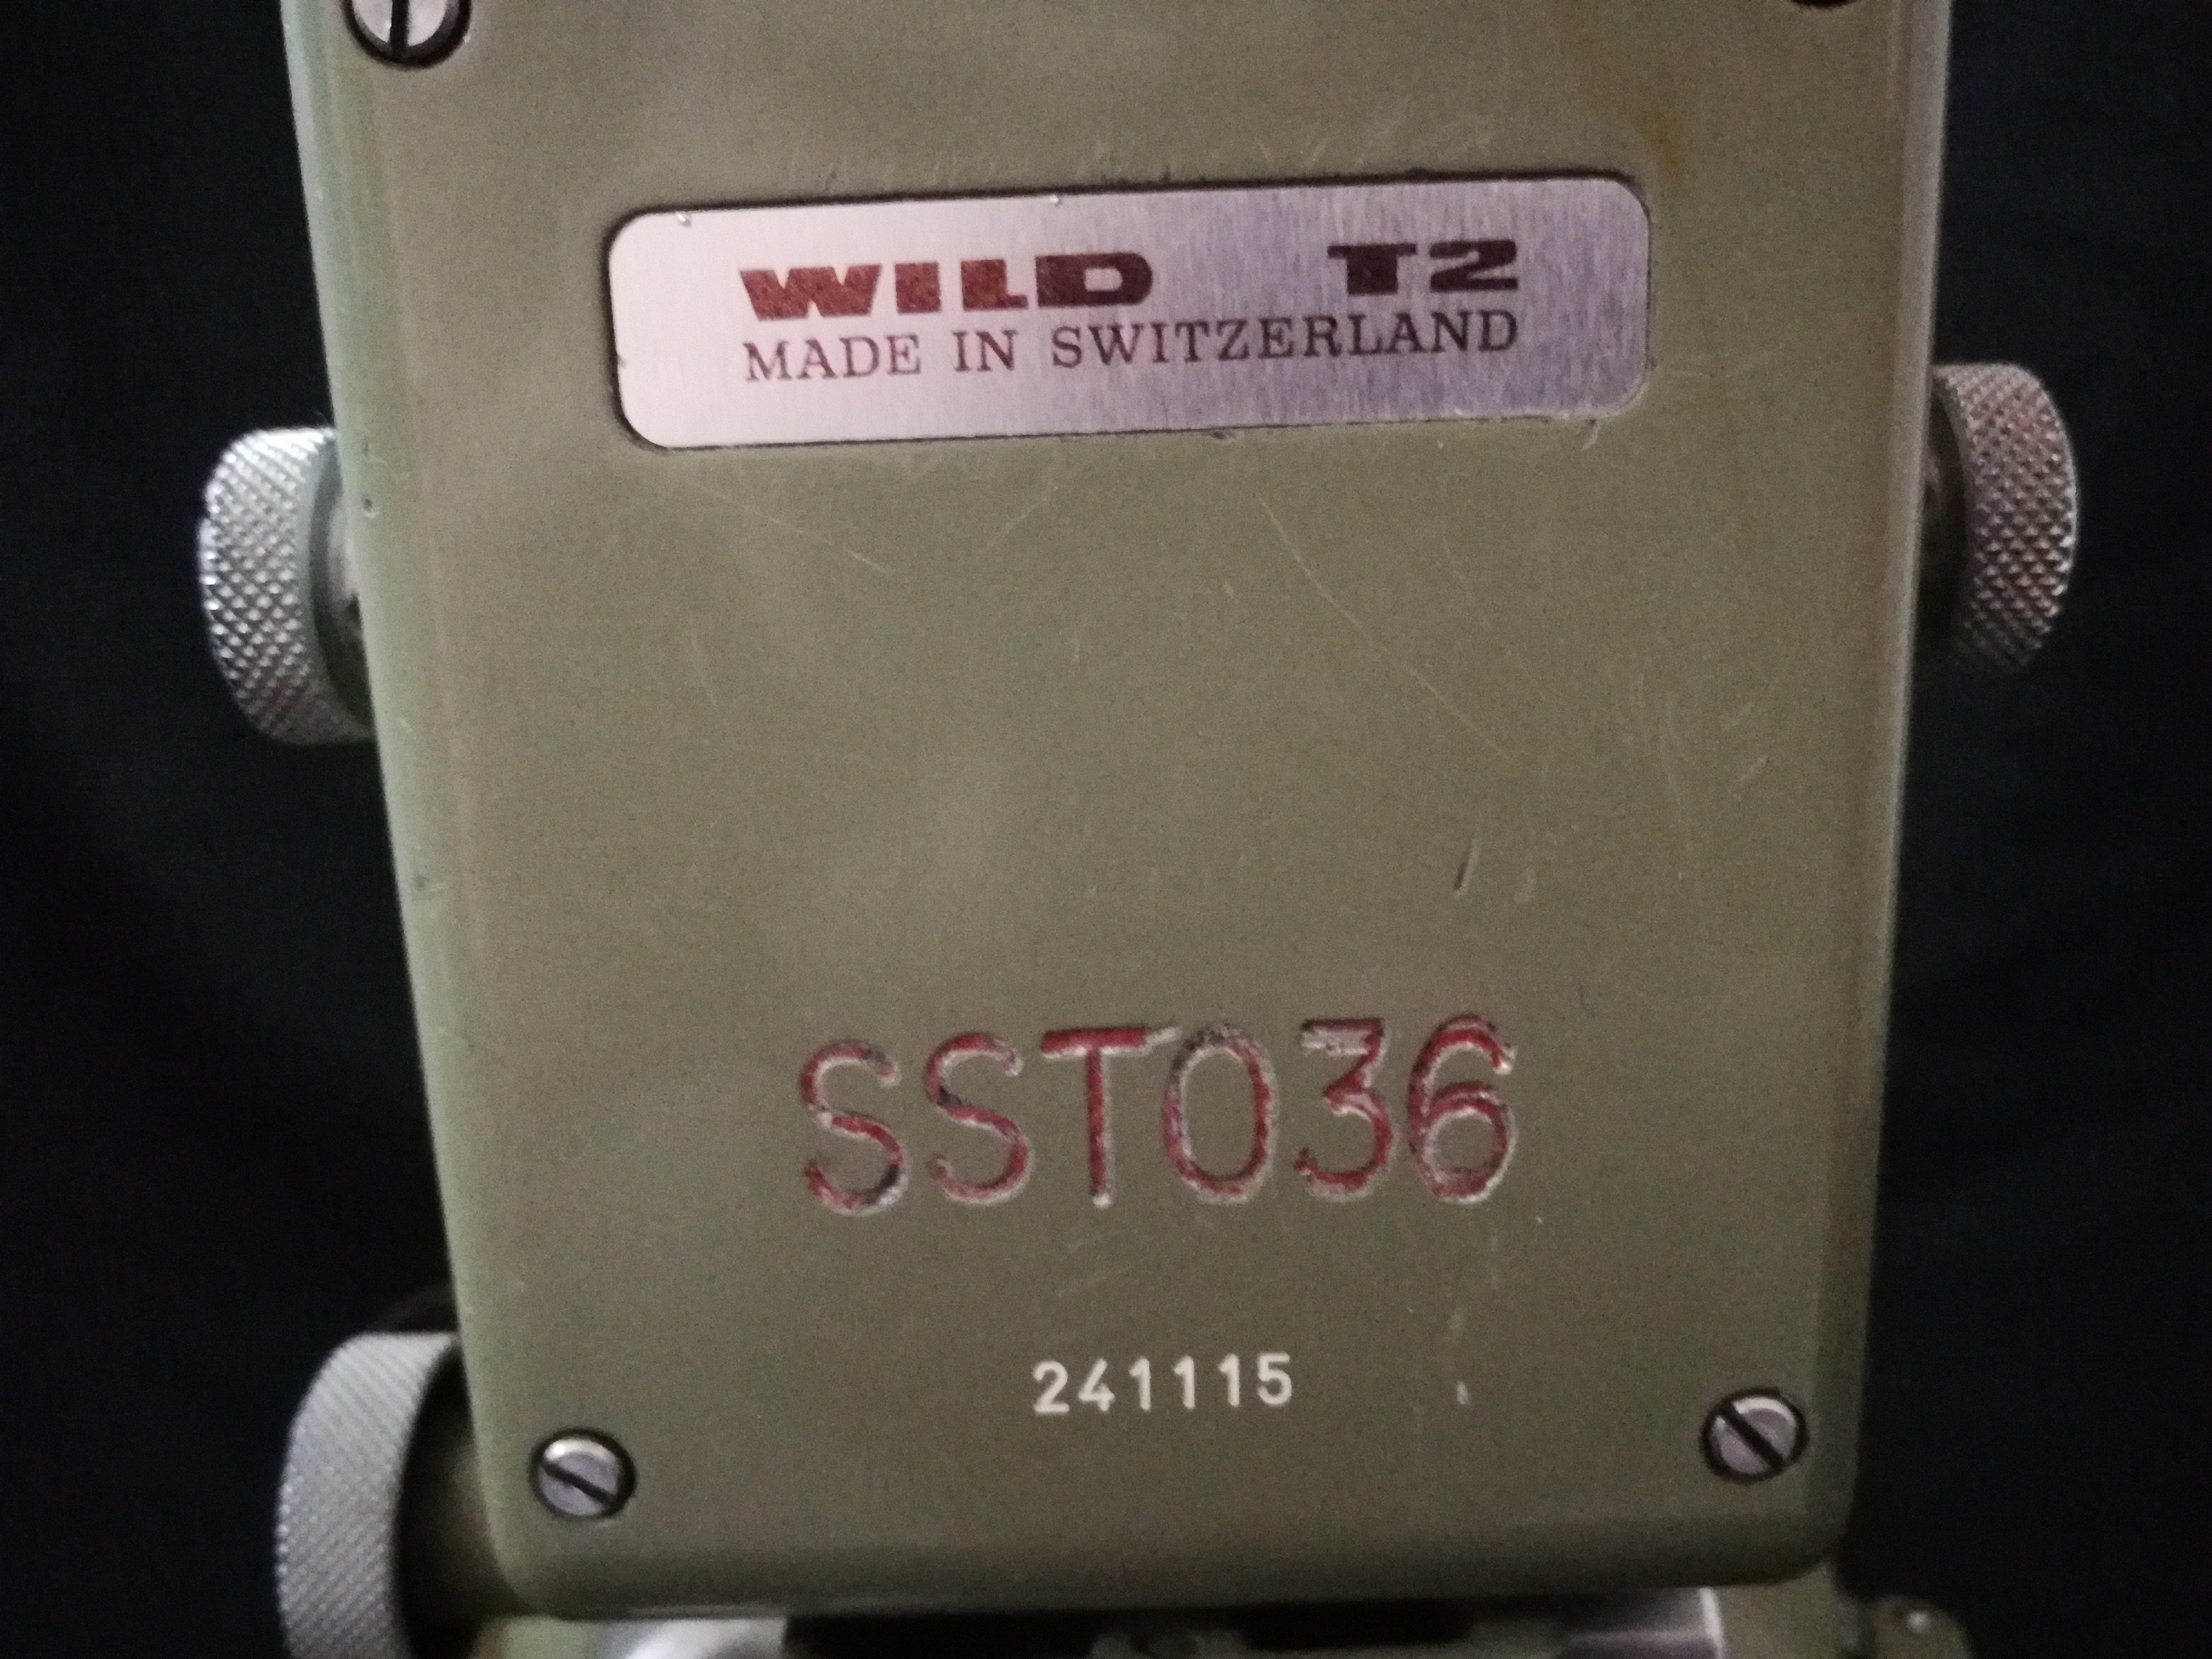 Wild T2 Heerbrugg theodolite close up view of name plate